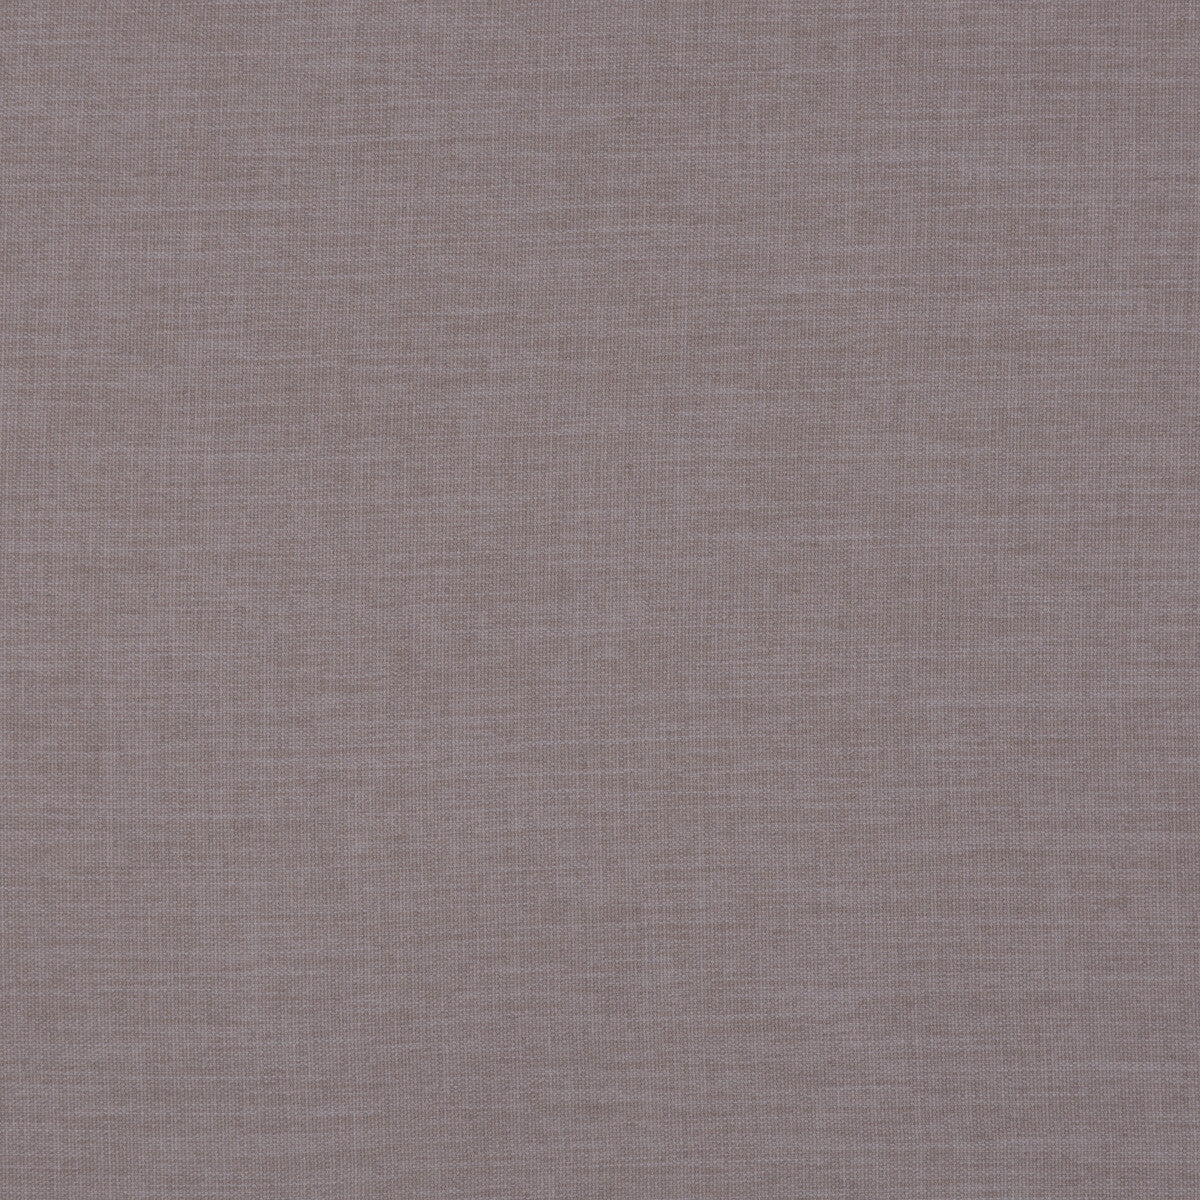 Fernshaw fabric in dusky mauve color - pattern PF50410.575.0 - by Baker Lifestyle in the Notebooks collection